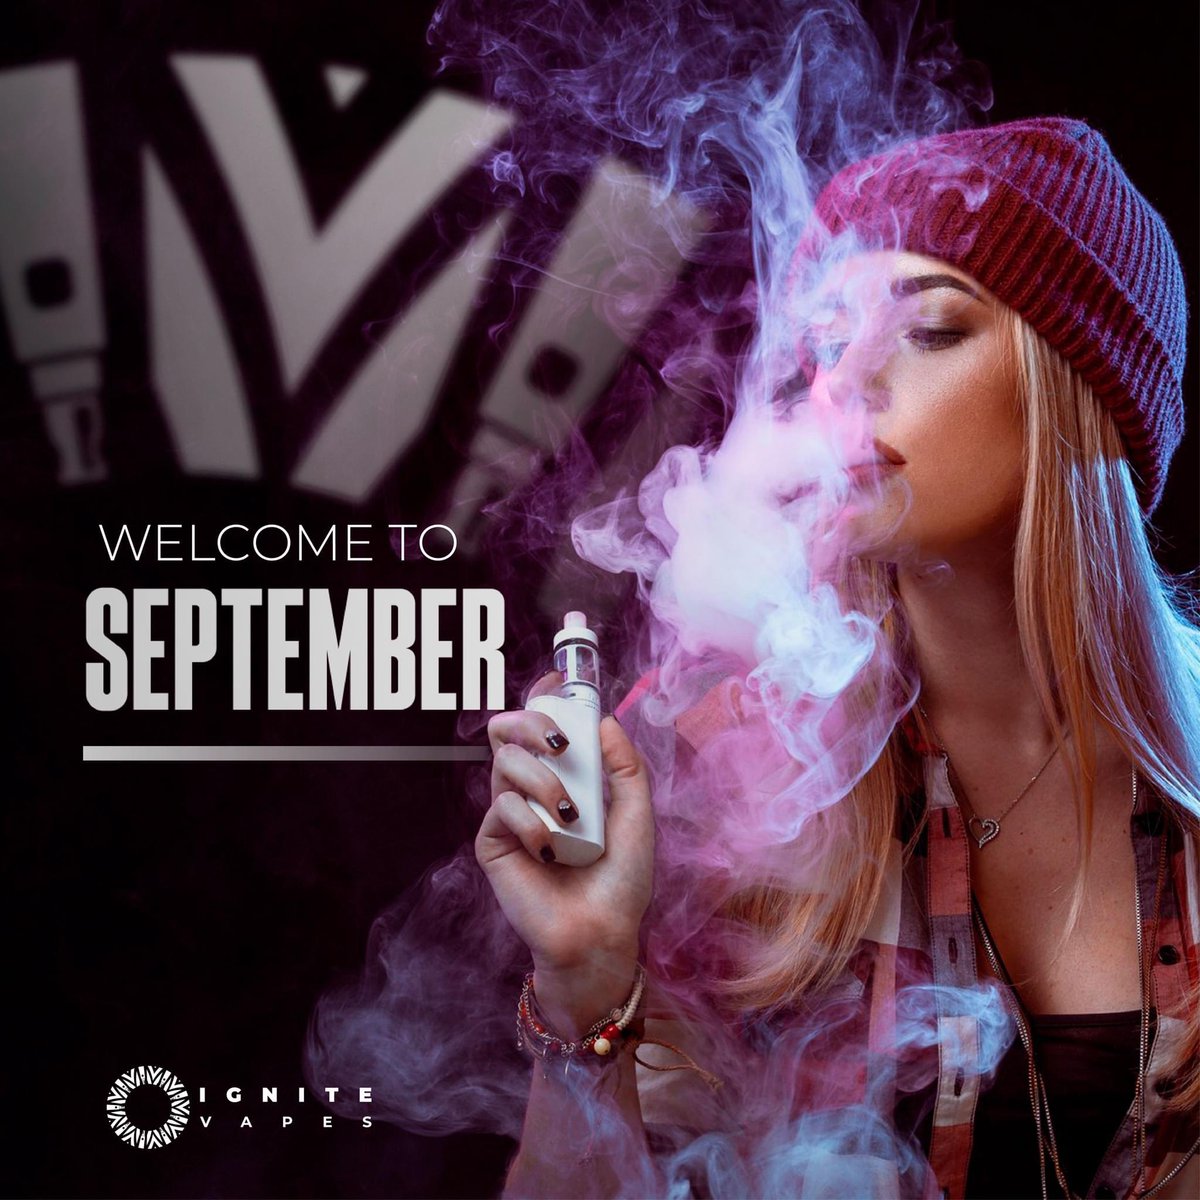 Inhale possibility, exhale doubt. September is the perfect time to refocus and chase your dreams with renewed determination. What's your September mantra? 💭✨ 

#SeptemberMotivation #ignite #vapesoul #vape #vapeflavors #VapeAddict #ignitevapes #VapeJoy #VapeTribe #savour